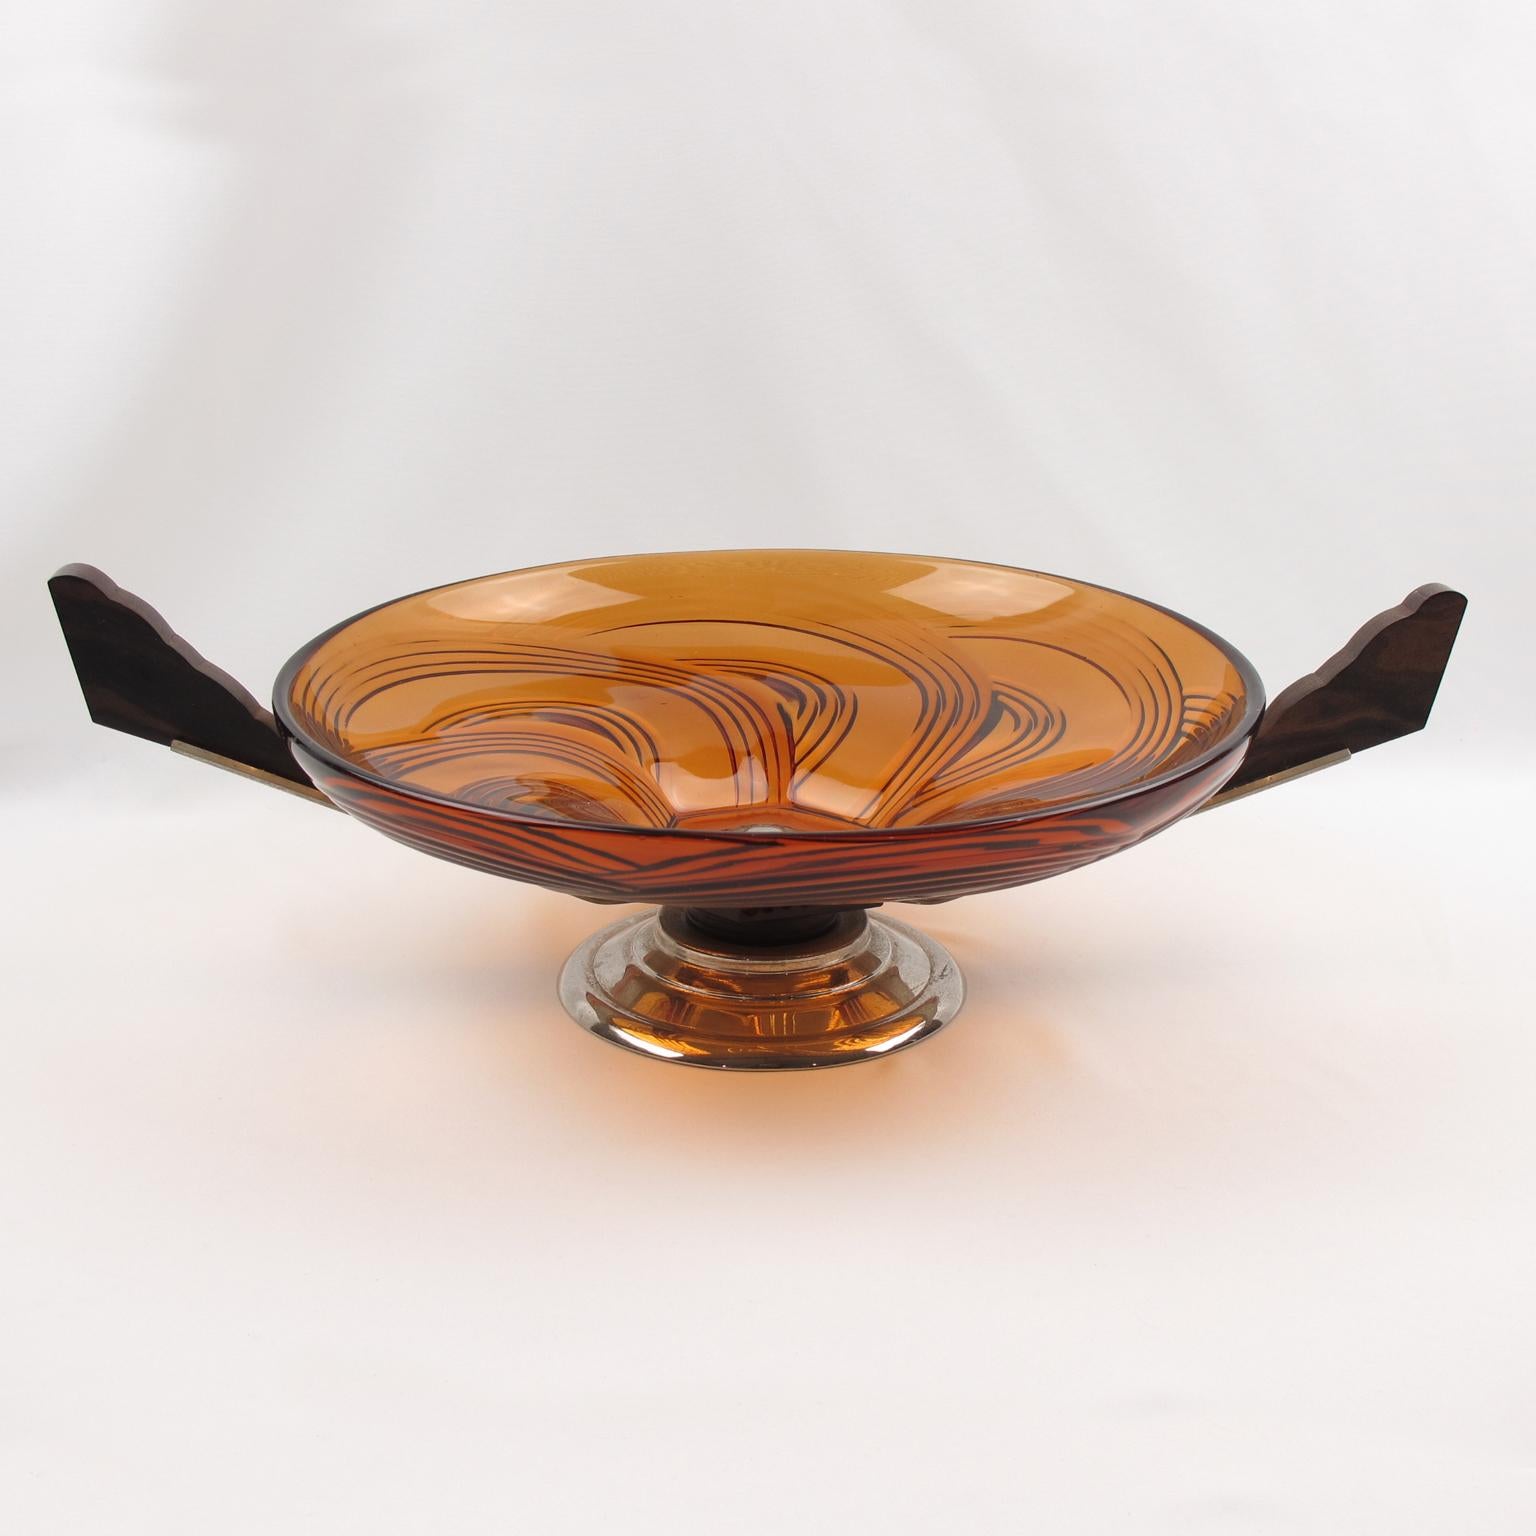 This stylish French Art Deco modernist centerpiece or bowl features a large round molded glass bowl with a swirled pattern in a lovely transparent burnt orange tone. The pedestal base is in chromed brass metal and Macassar wood. The centerpiece is